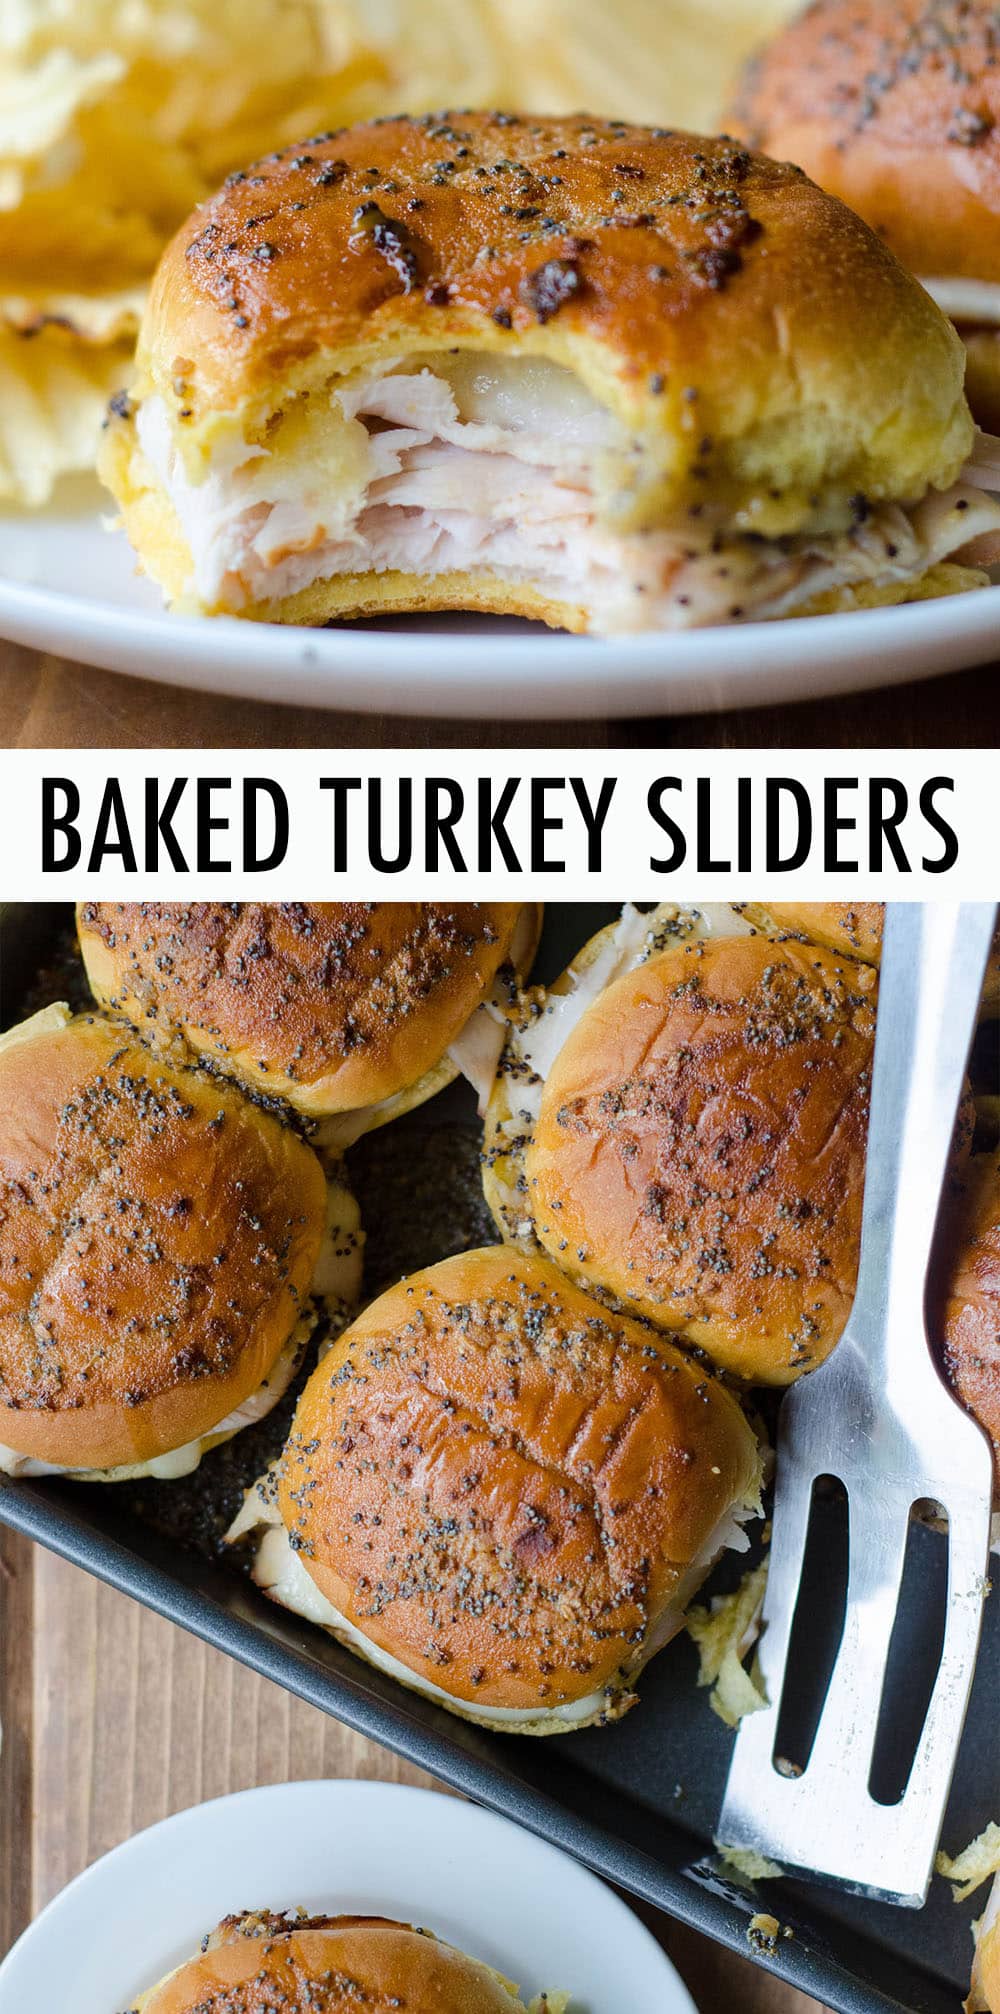 These easy baked turkey sliders with cheese are covered in a simple honey mustard glaze. via @frshaprilflours